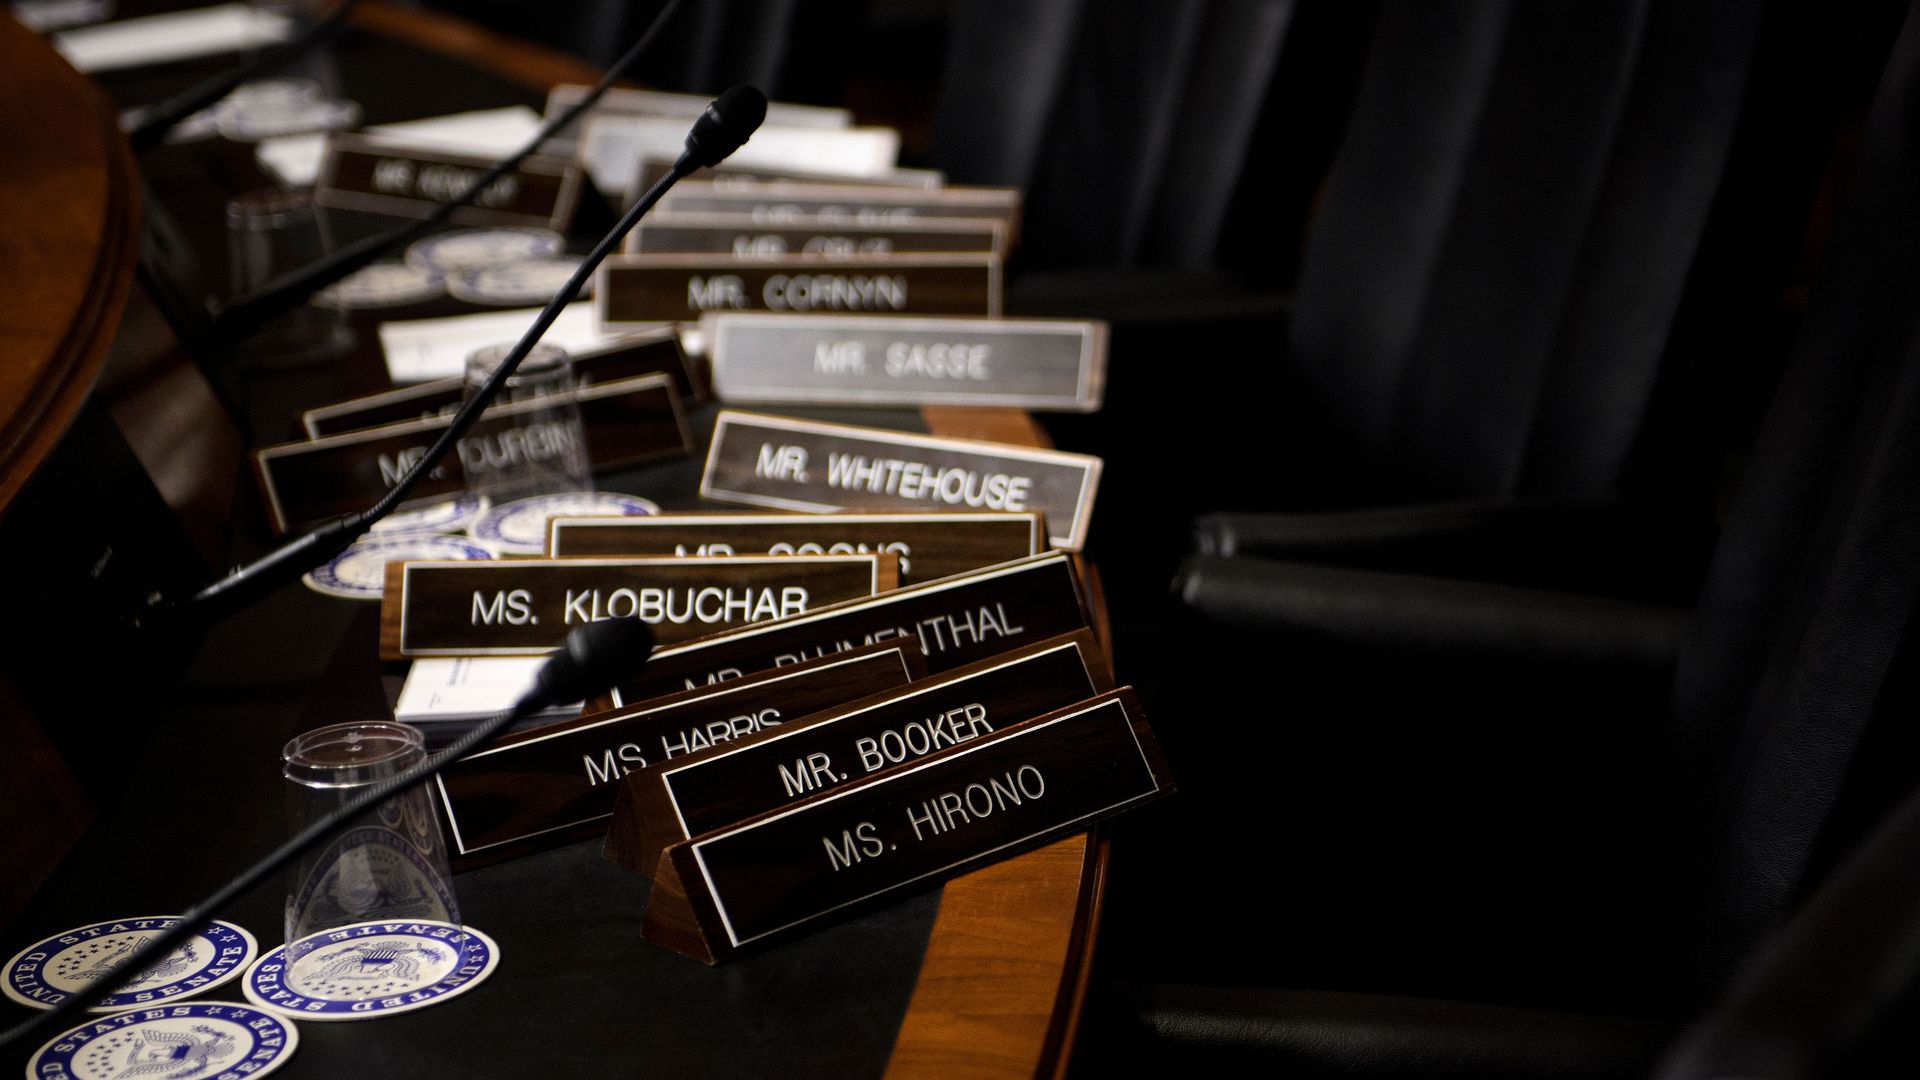 Name plates are seen as the Senate Judiciary Committee's room on Capitol Hill during preparations one day before the hearing with Blasey Ford and Supreme Court nominee Judge Brett Kavanaugh. 